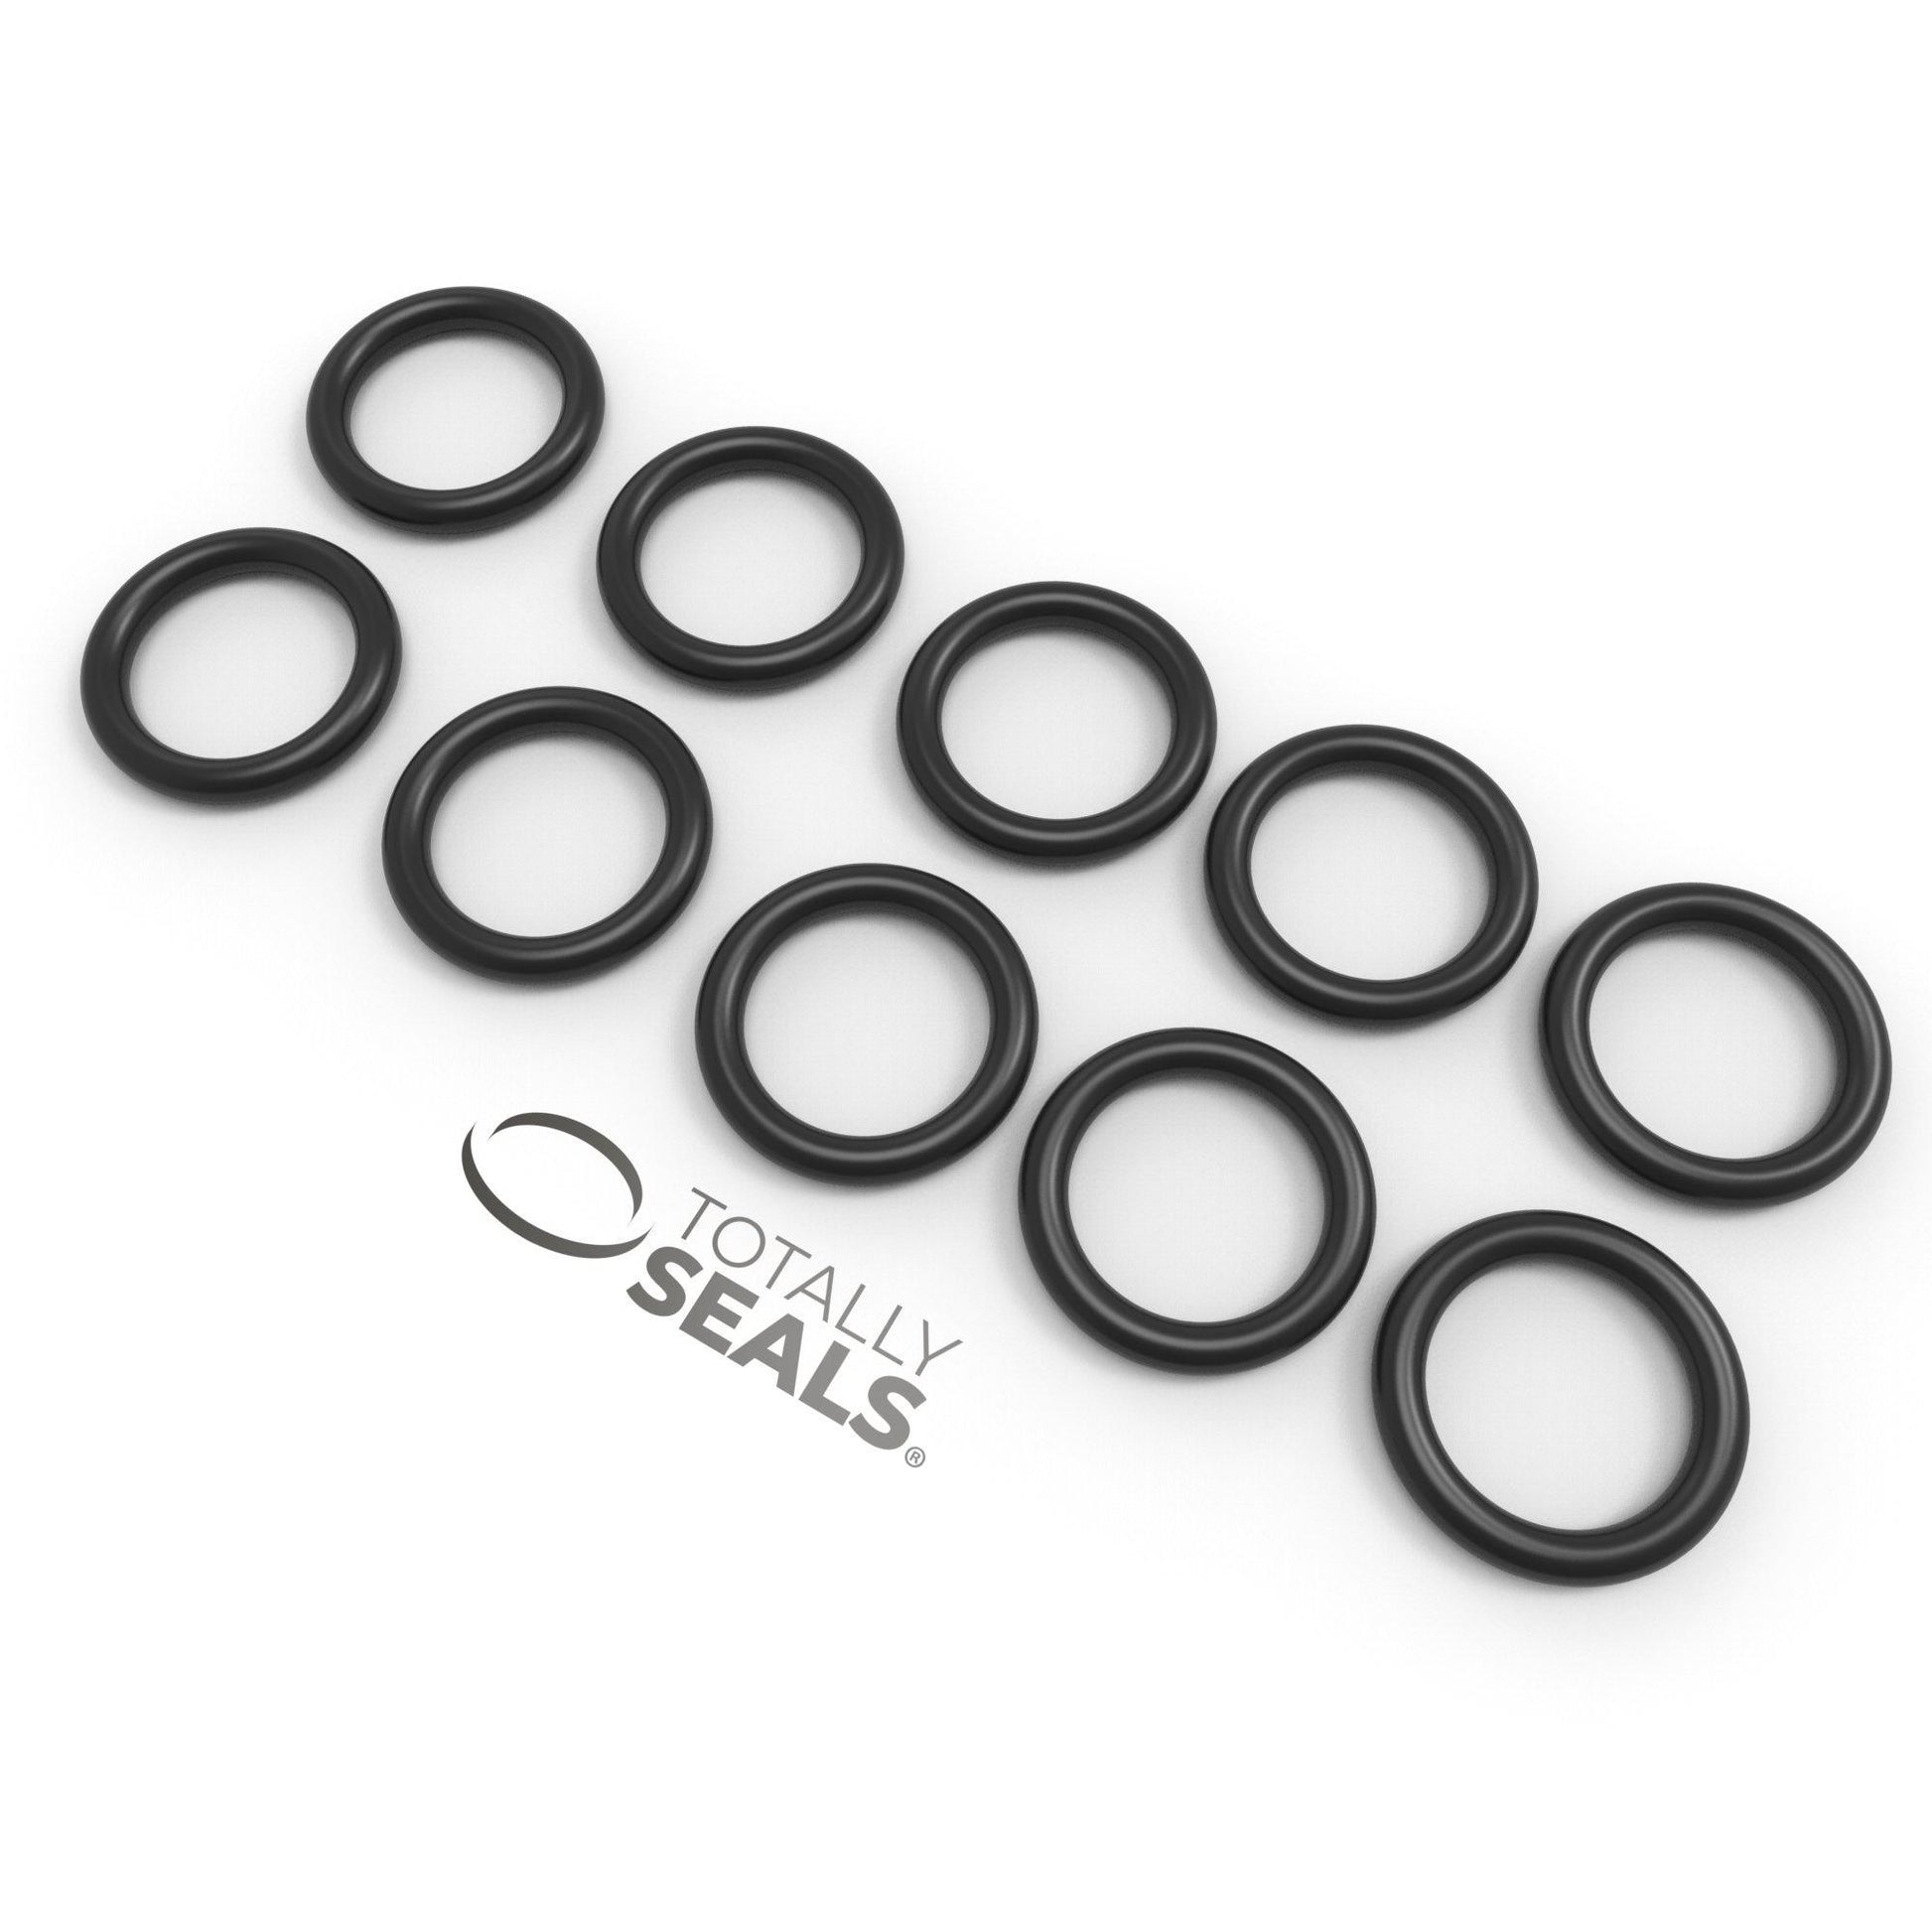 14mm x 1.5mm (17mm OD) Nitrile O-Rings - Totally Seals®